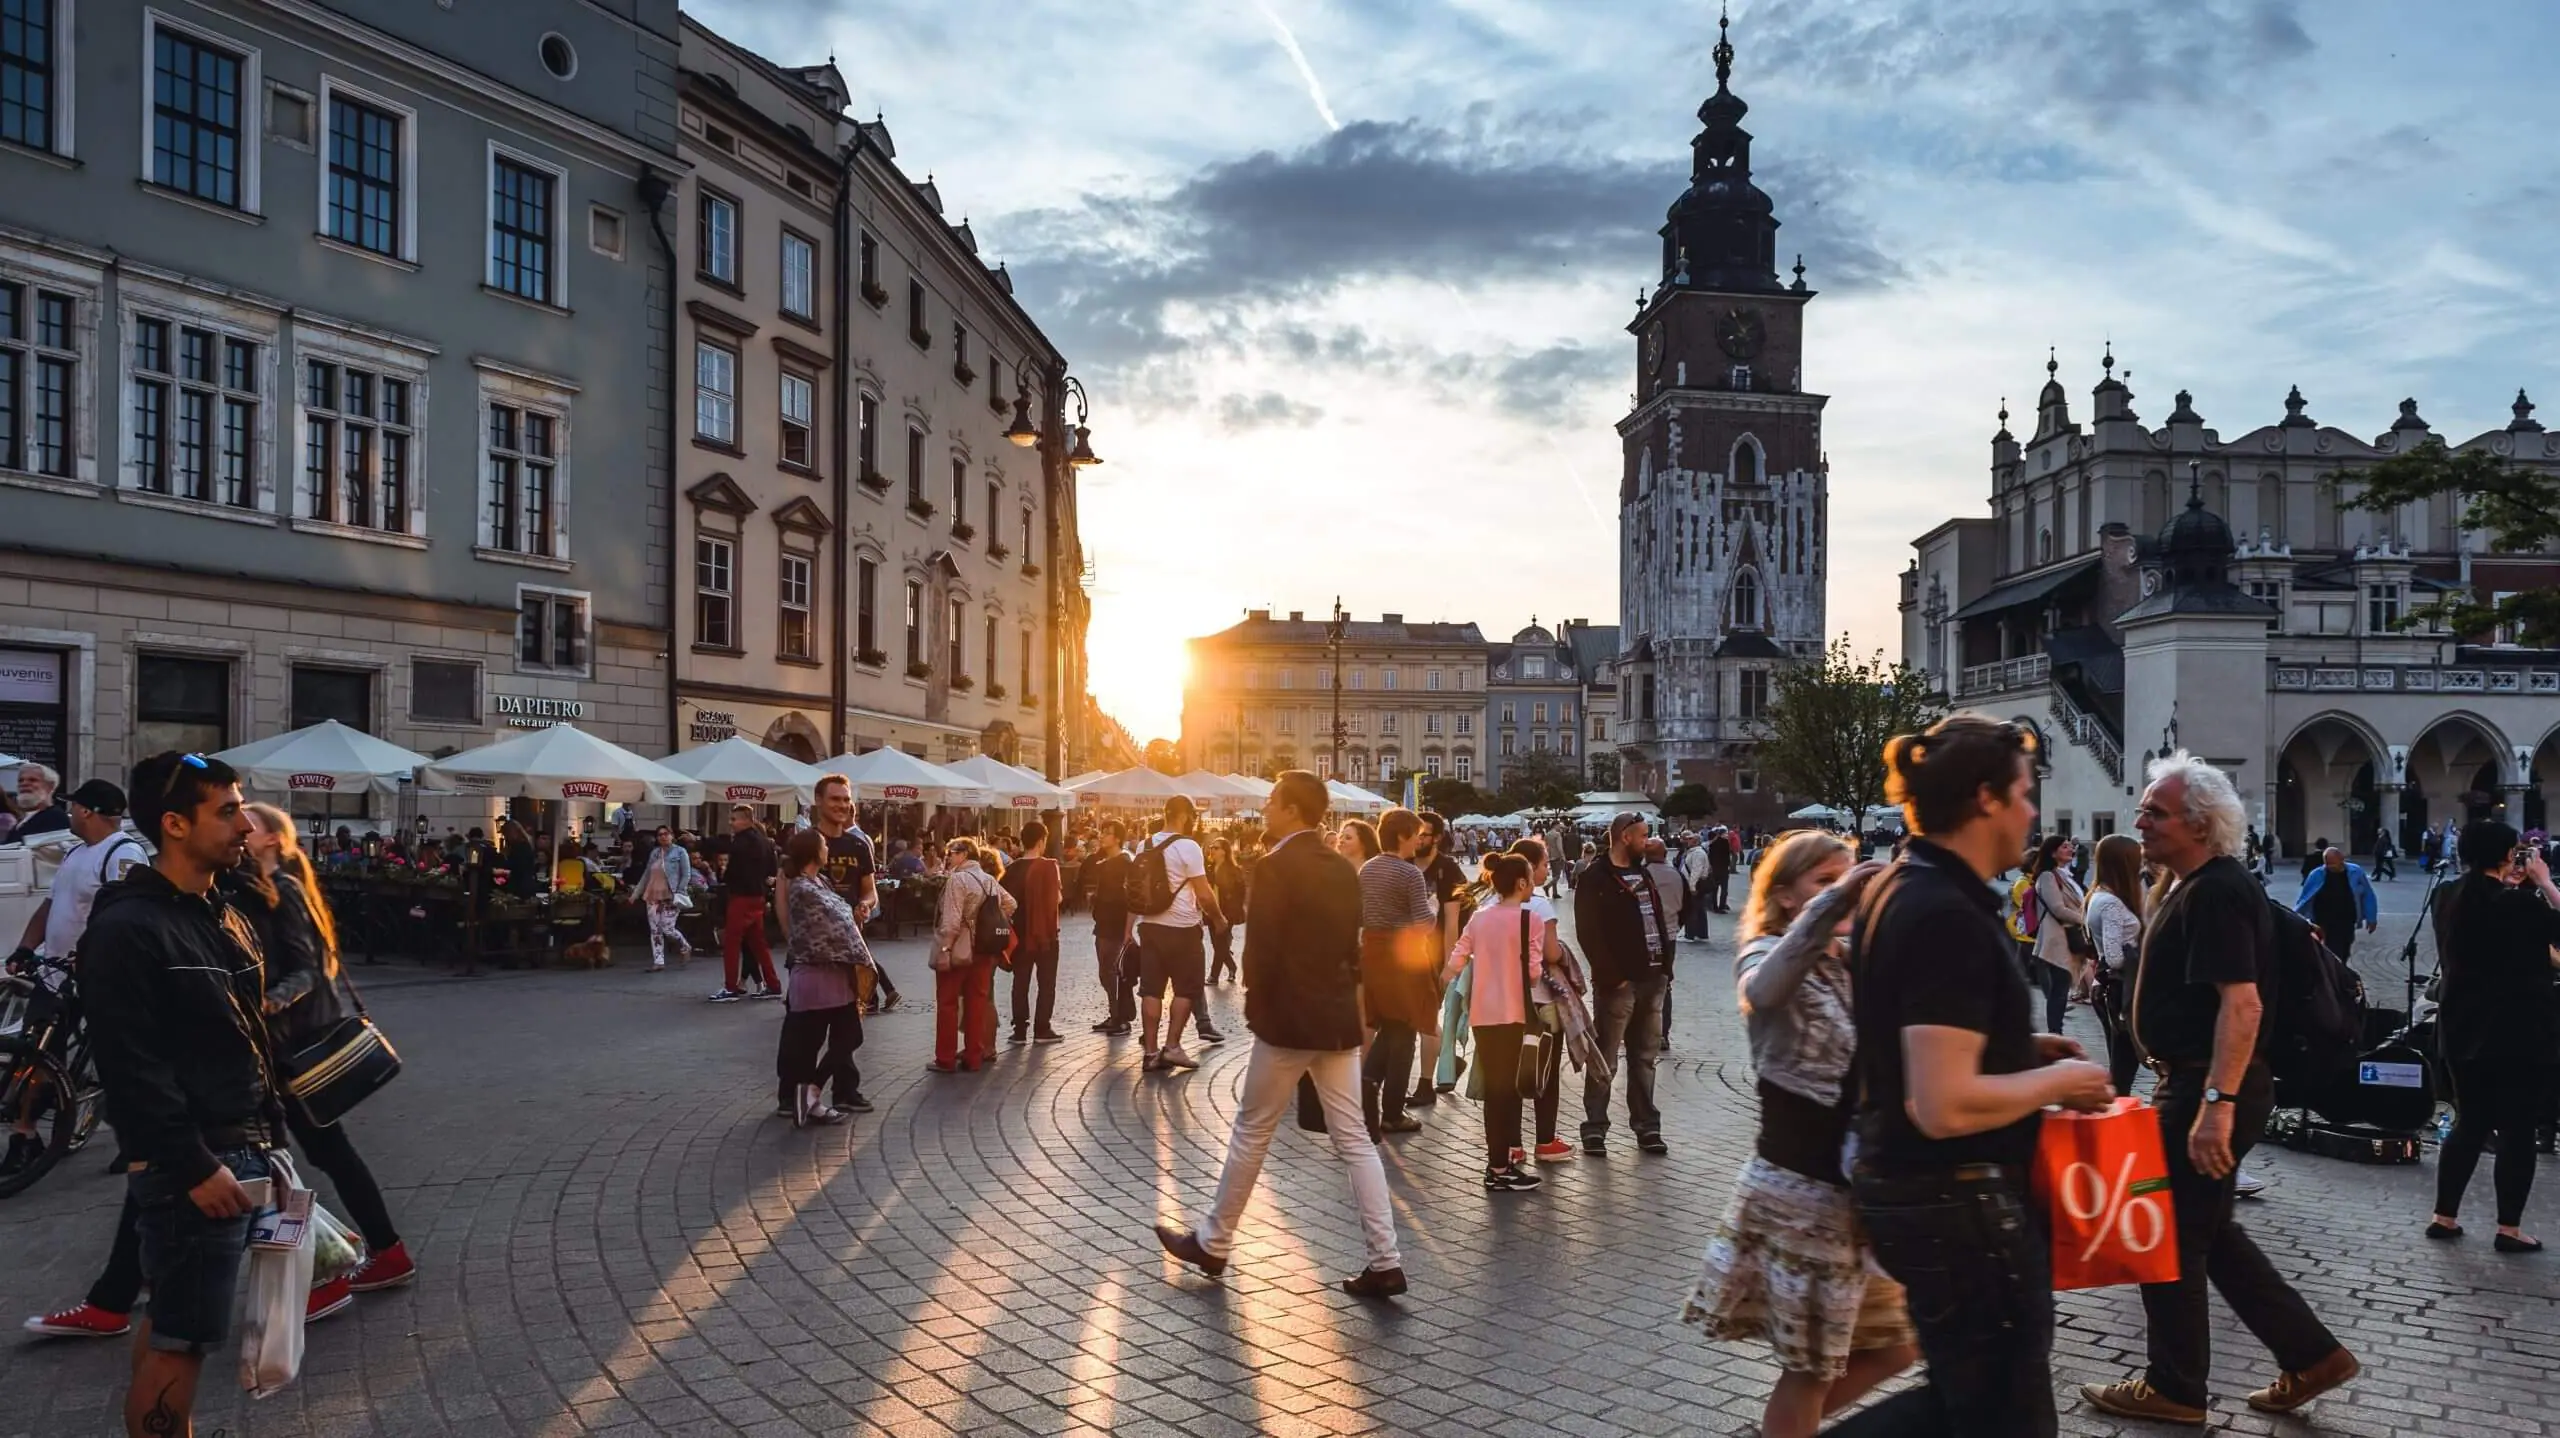 people waling in the evening sun in a European market